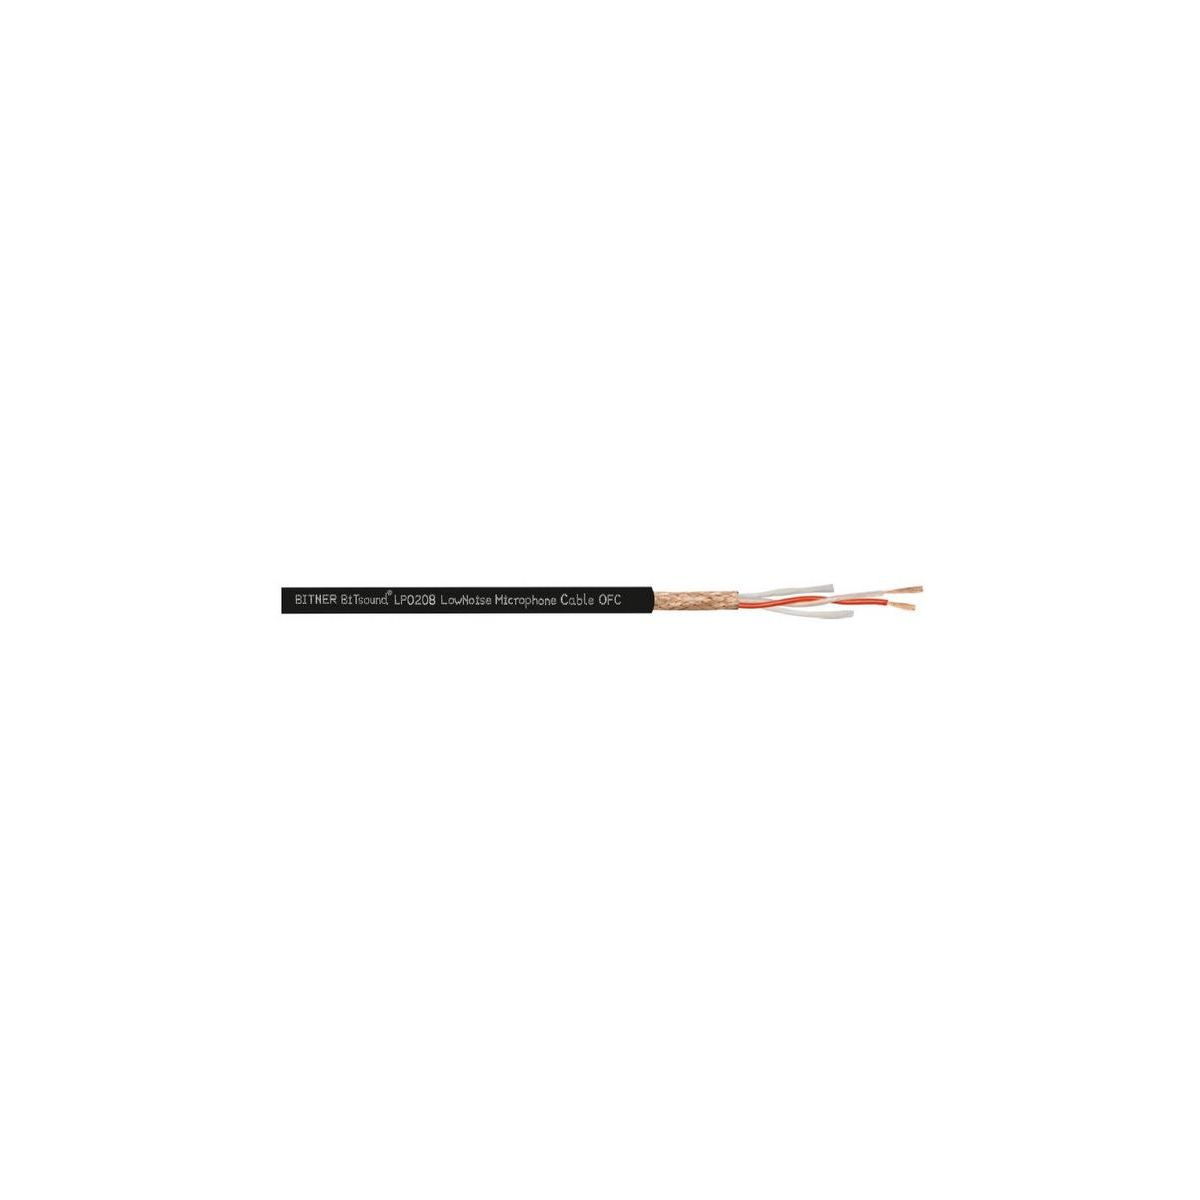 BiTsound®LP0208 LowNoise Microphone Cable OFC 4x0,23mm2